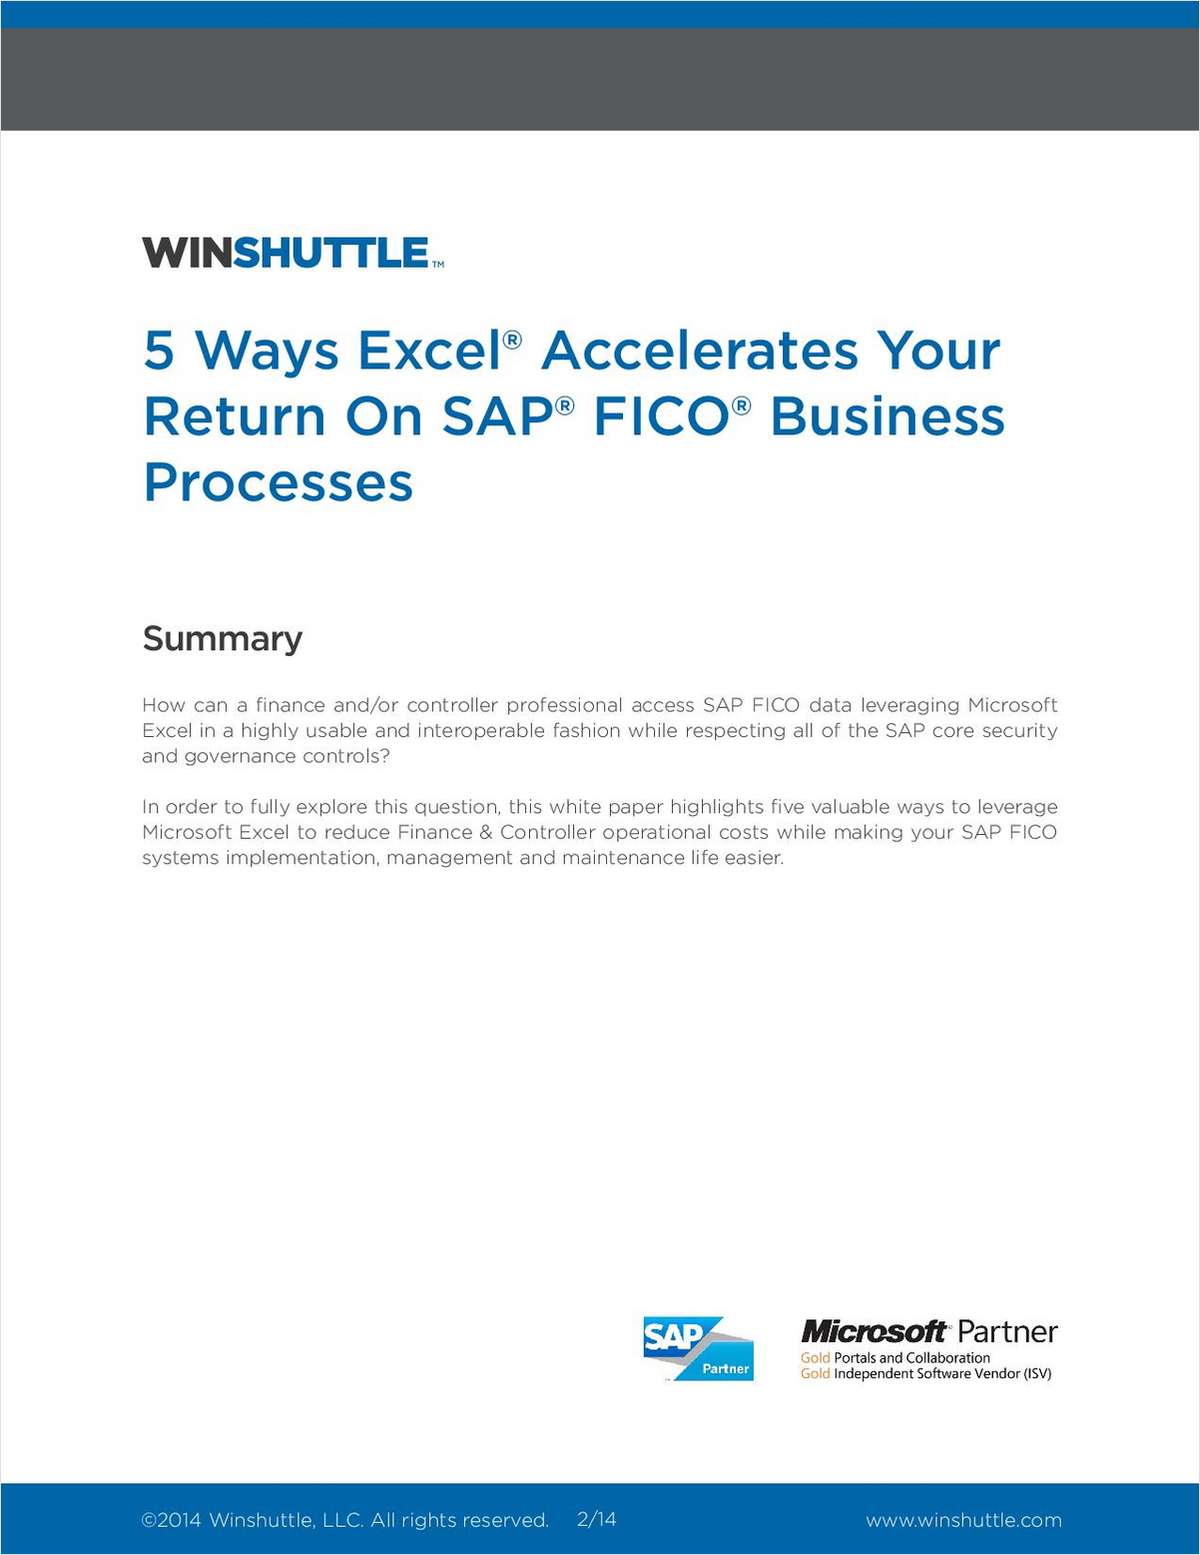 5 Ways Excel Accelerates Your Return on SAP FICO Business Processes